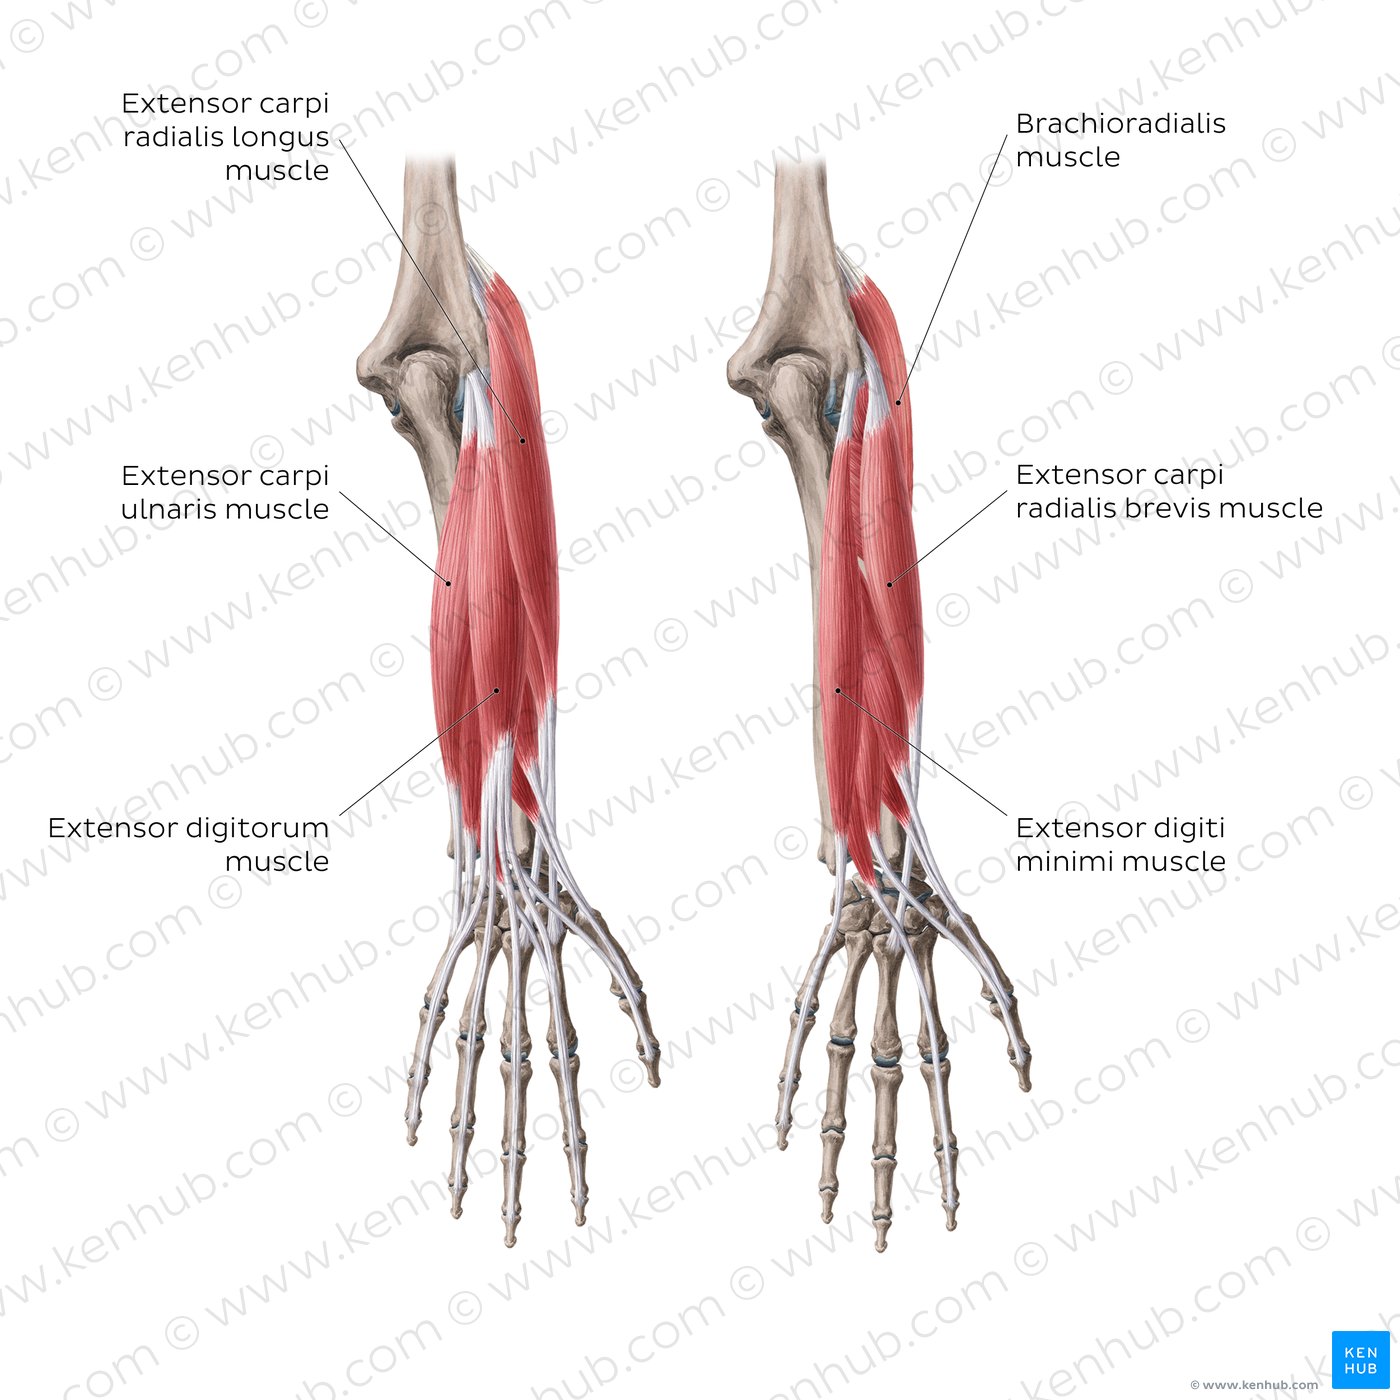 Extensors of the forearm (superficial layer)